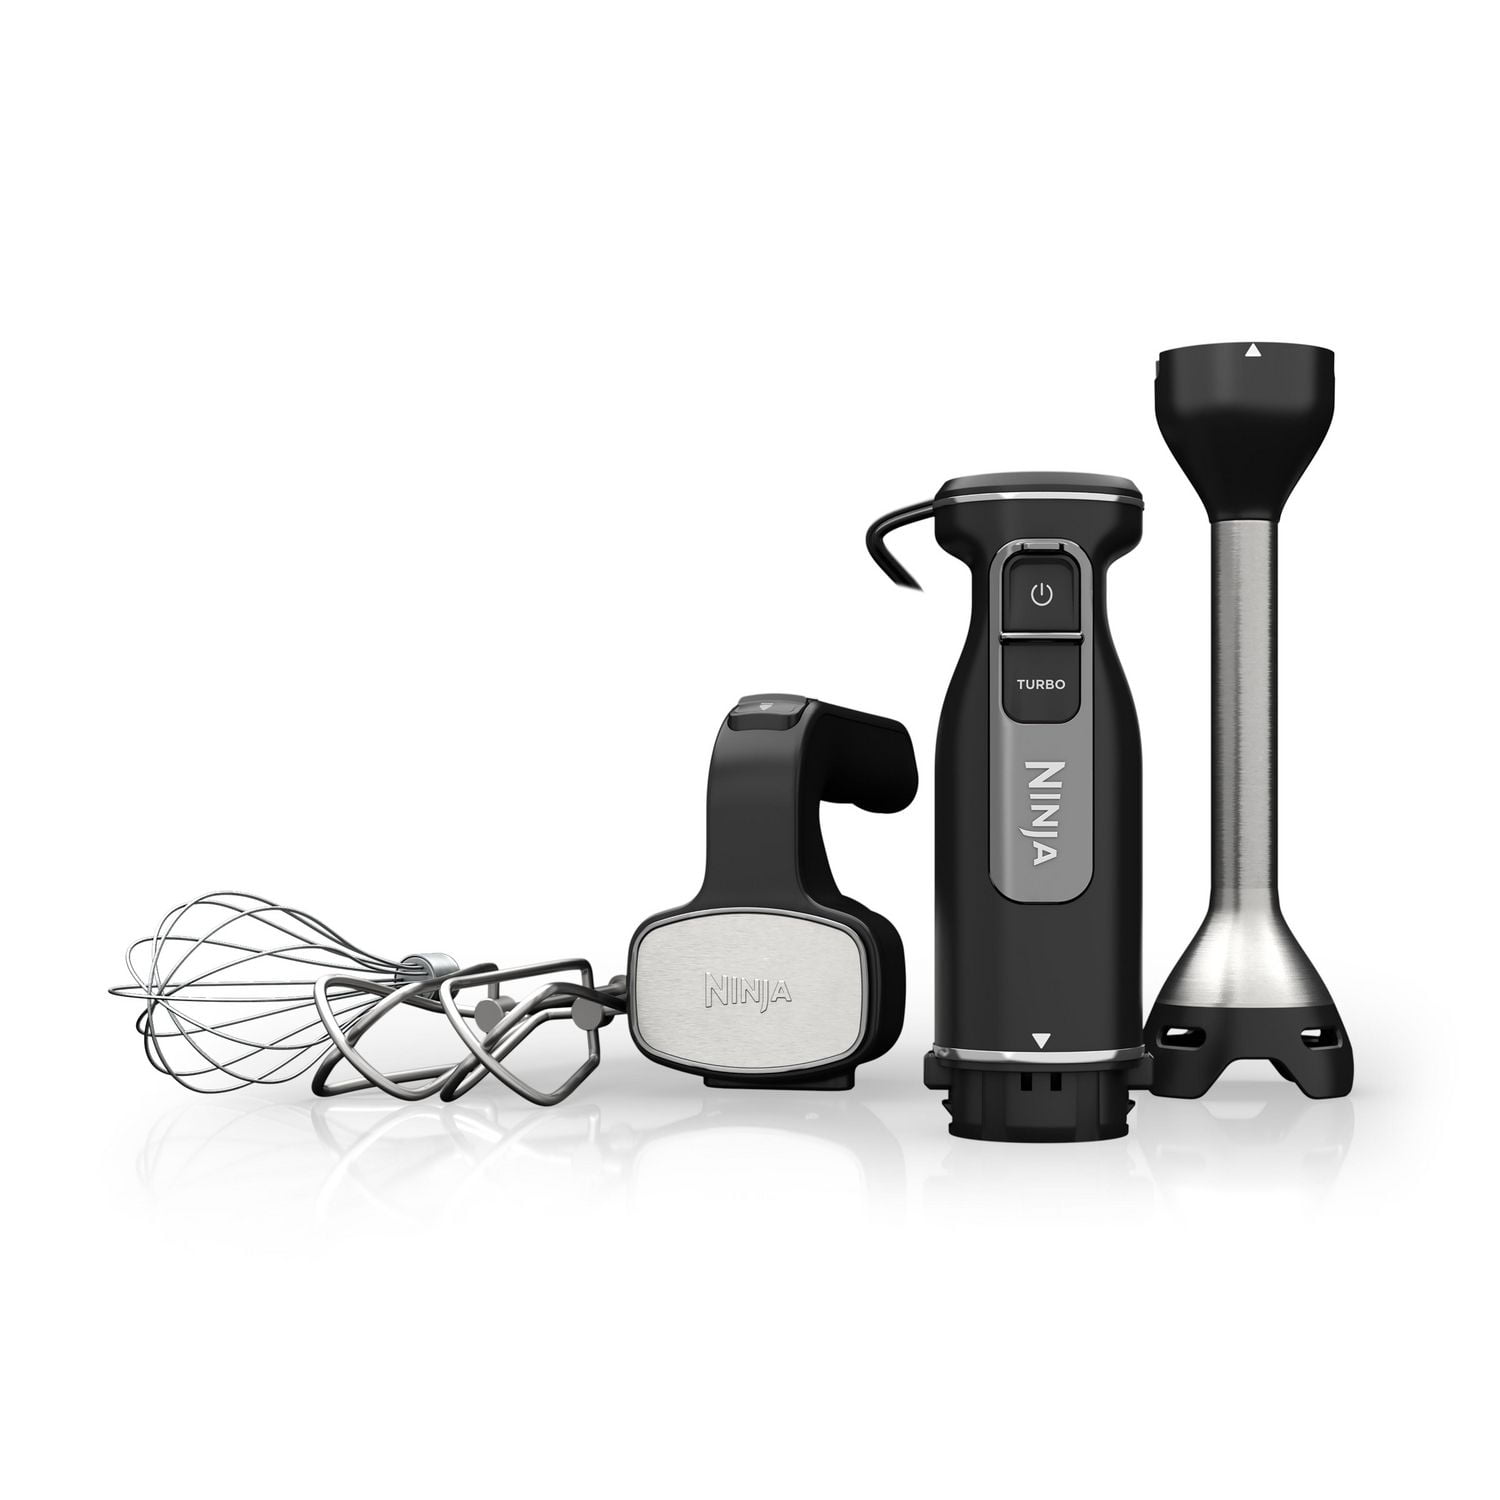 BRAND NEW - Ninja CI101 Foodi Power Mixer System, 750-Peak-Watt Hand  Blender and Hand Mixer Combo with Whisk, Beaters, Dough Hooks, 3-Cup  Blending Ves for Sale in Alexander, AR - OfferUp